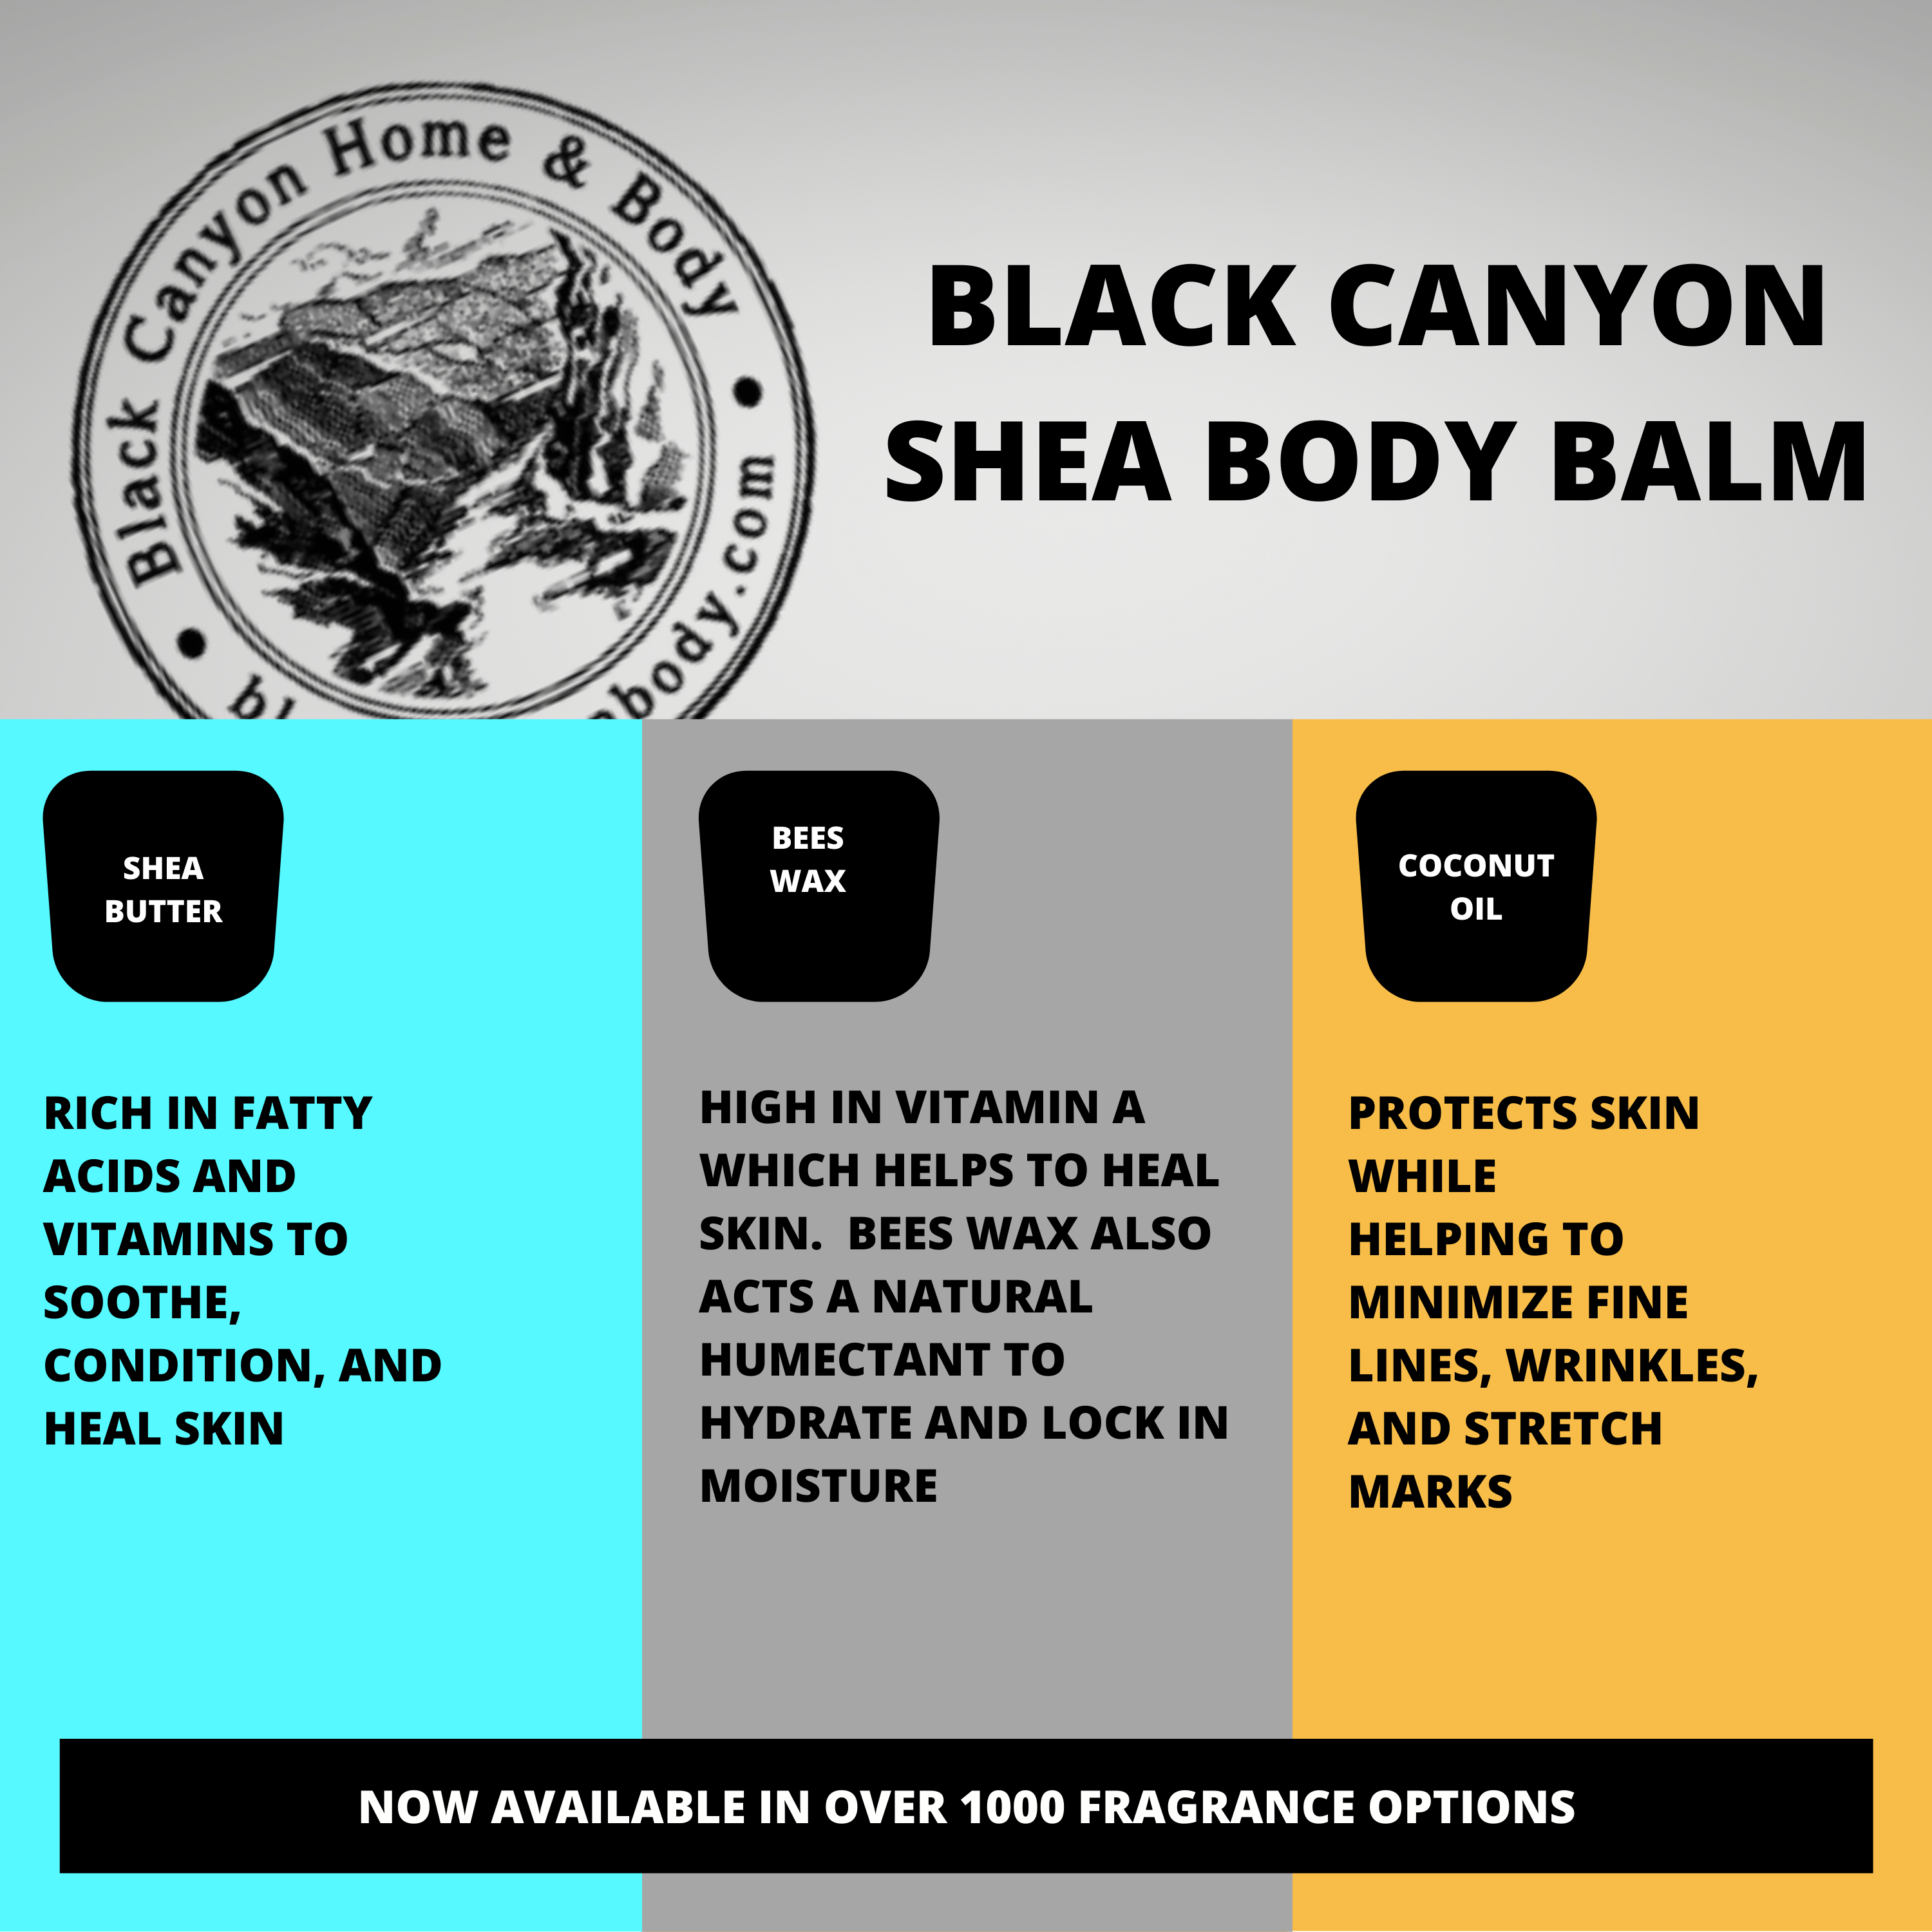 Black Canyon Lemongrass & Sage Scented Natural Body Balm with Shea